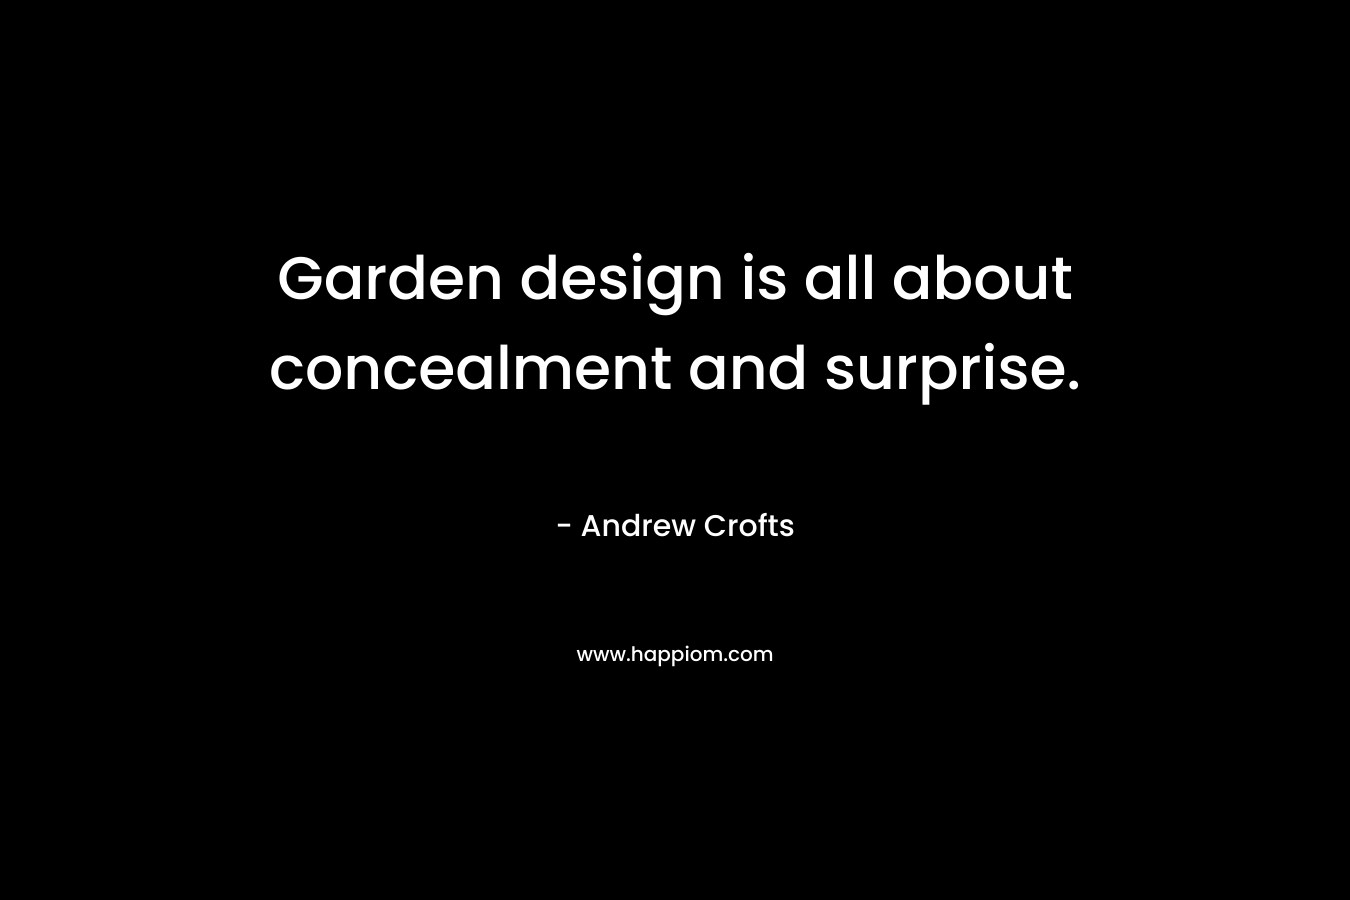 Garden design is all about concealment and surprise.